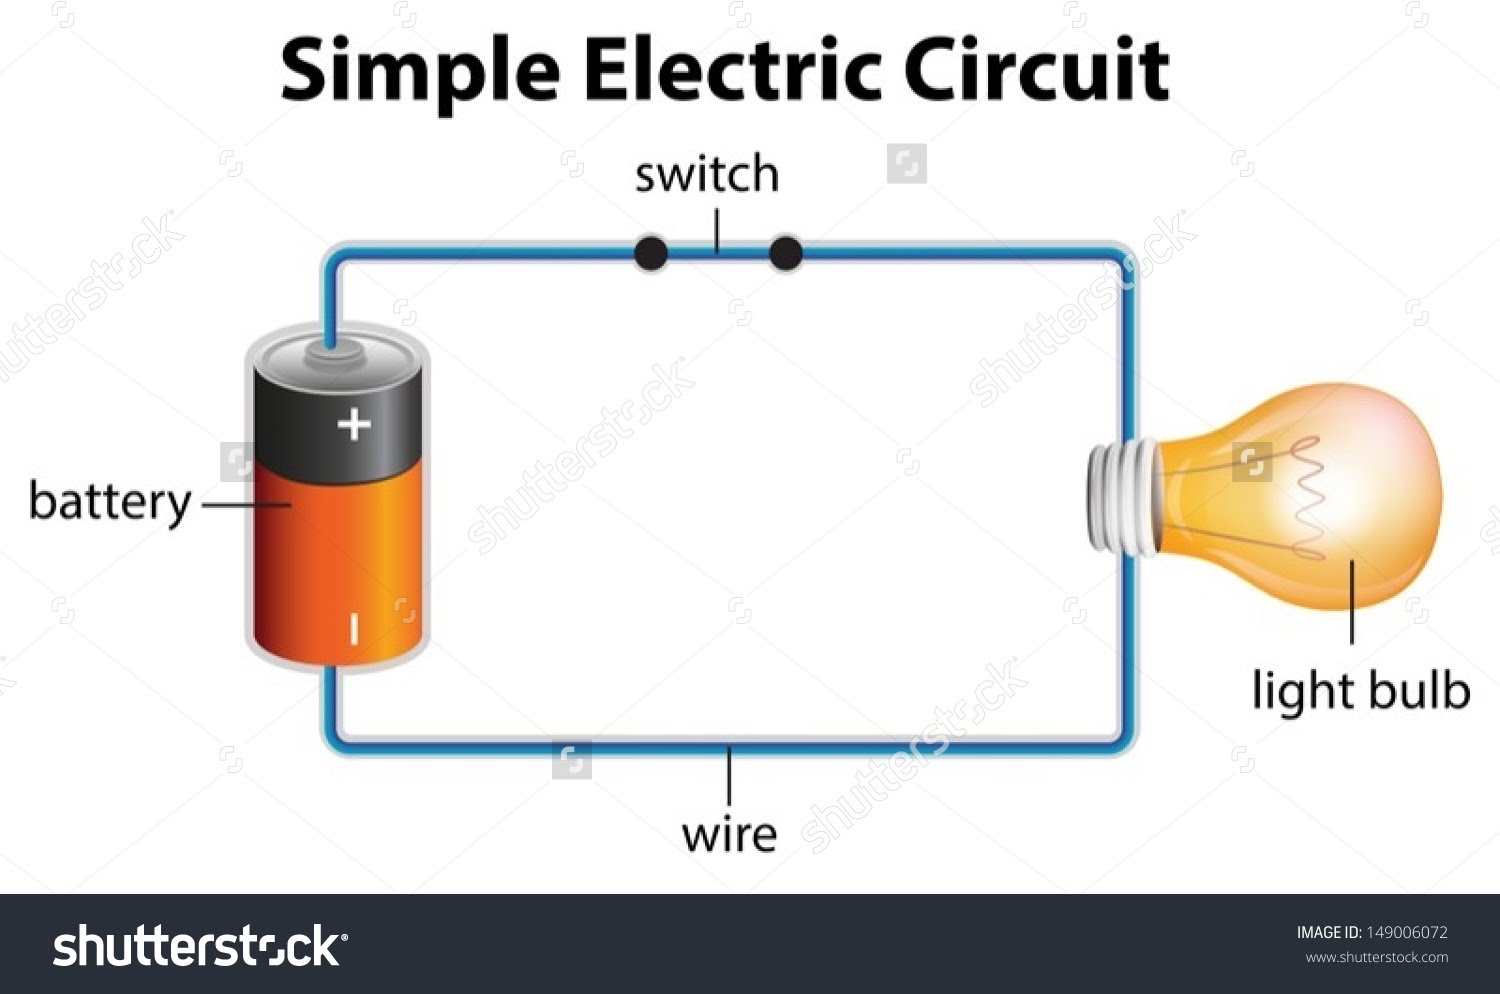 battery clipart simple